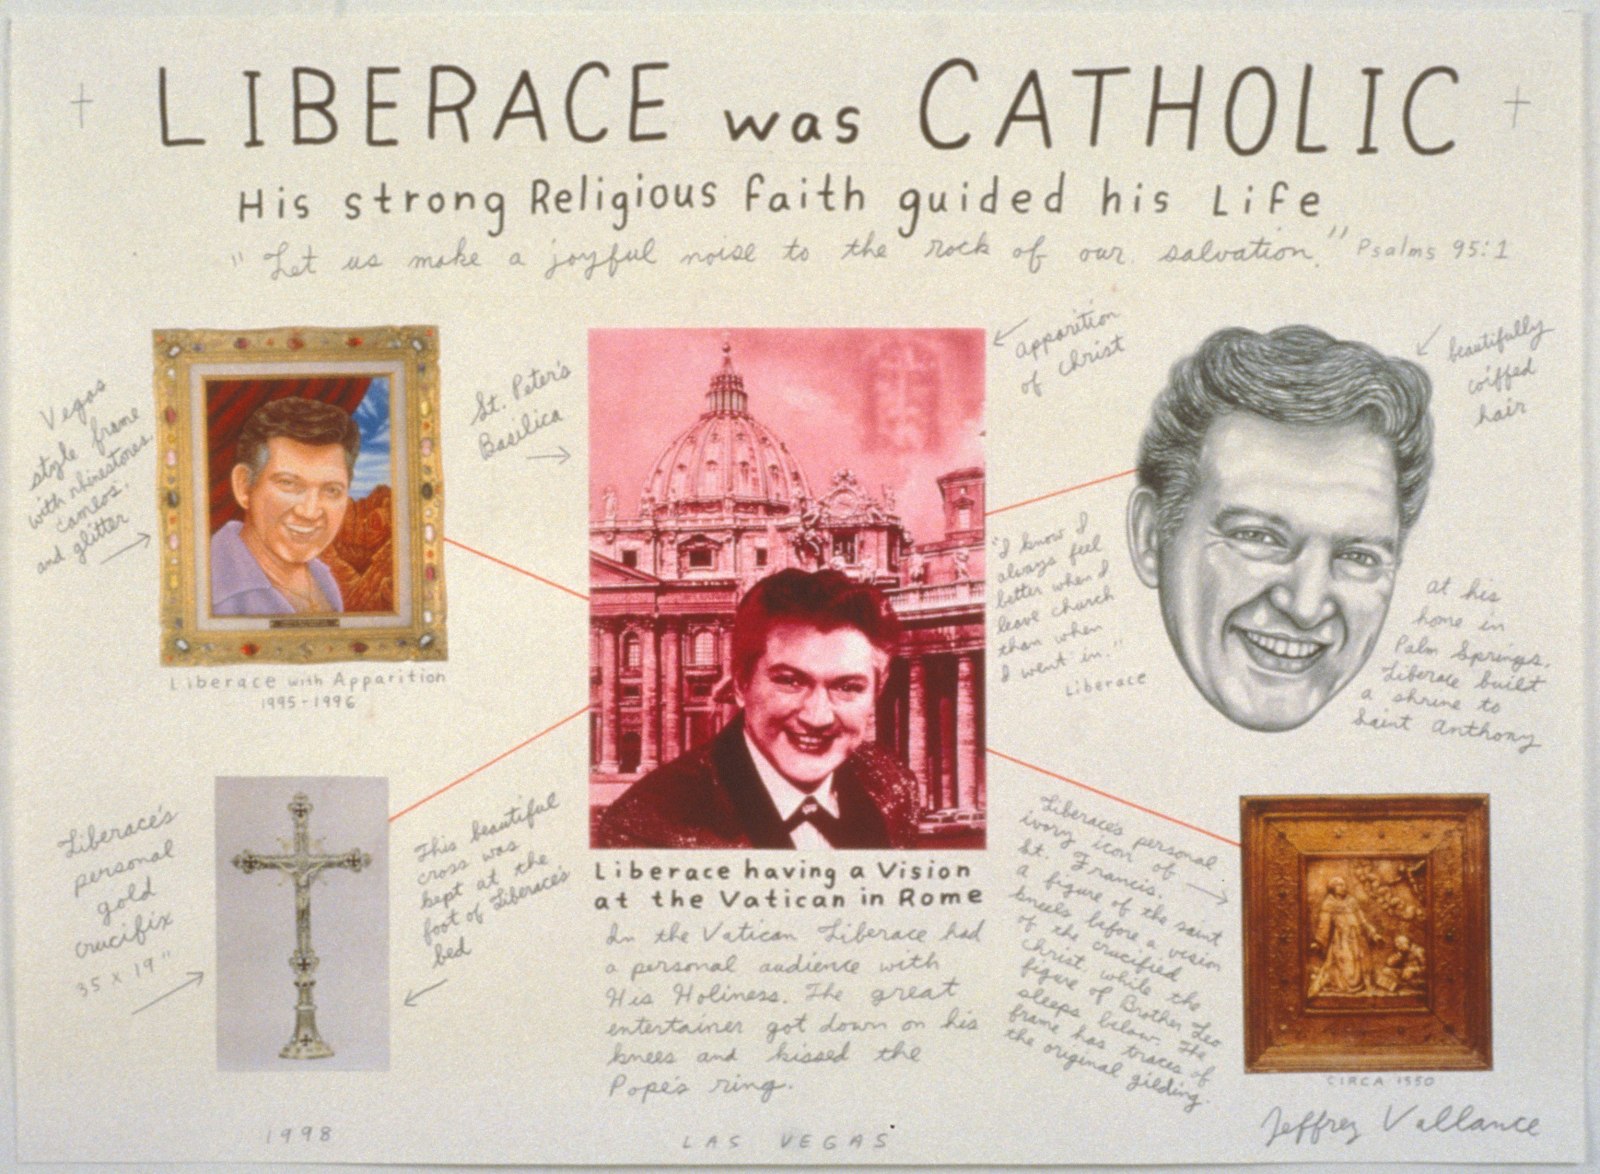 JEFFREY VALLANCE, Liberace was Catholic His Strong Religious Faith Guided His Life, 1998